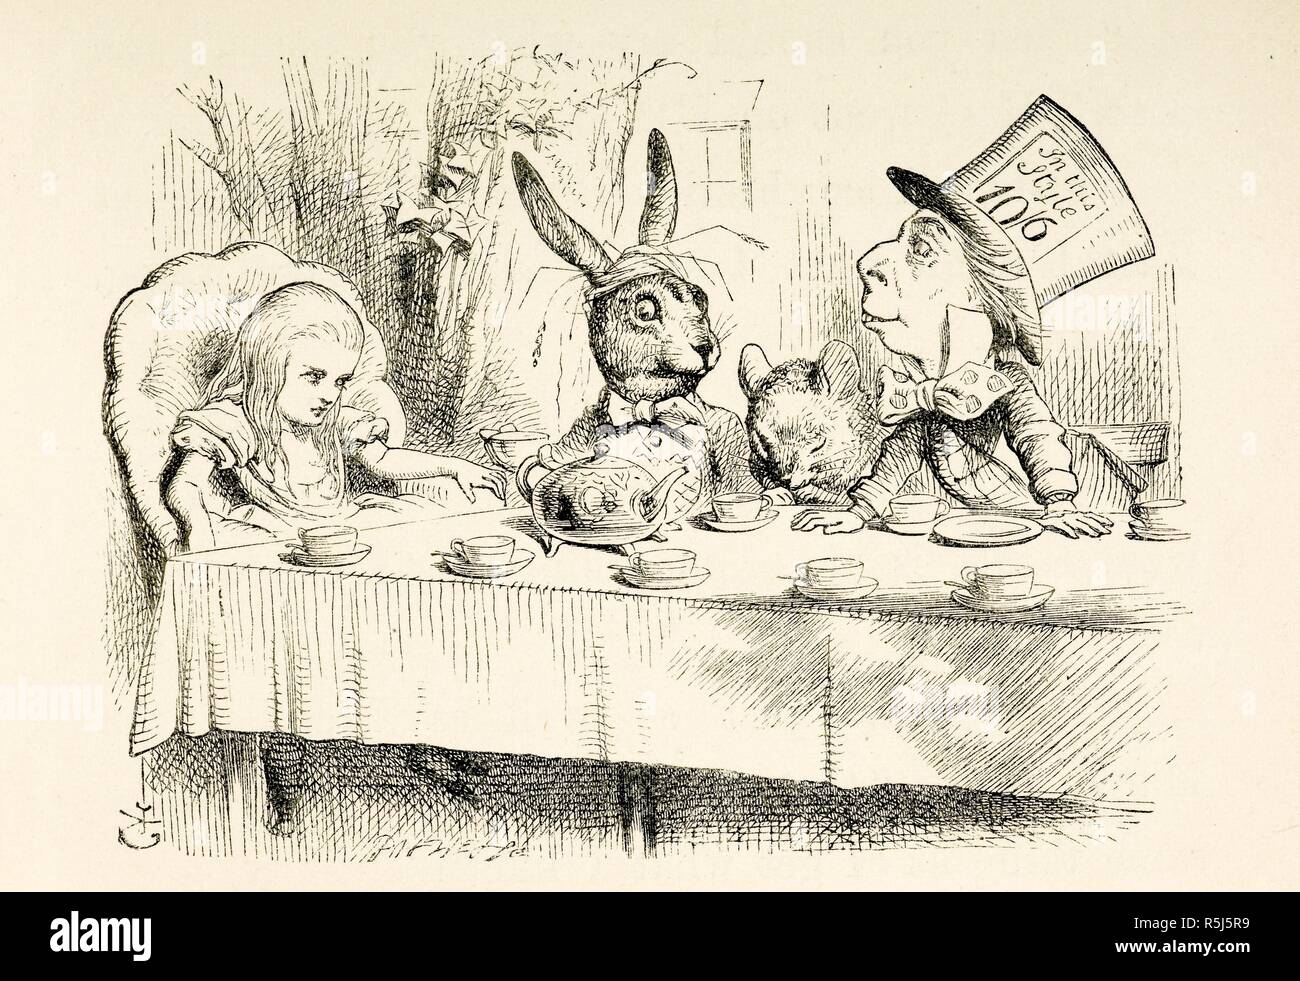 Alice at the Mad Hatter's tea party. Alice's Adventures in Wonderland. With forty-two illustrations by John Tenniel. London : Macmillan & Co., 1866 [1865]. Source: C.59.g.11 page 97 detail. Stock Photo